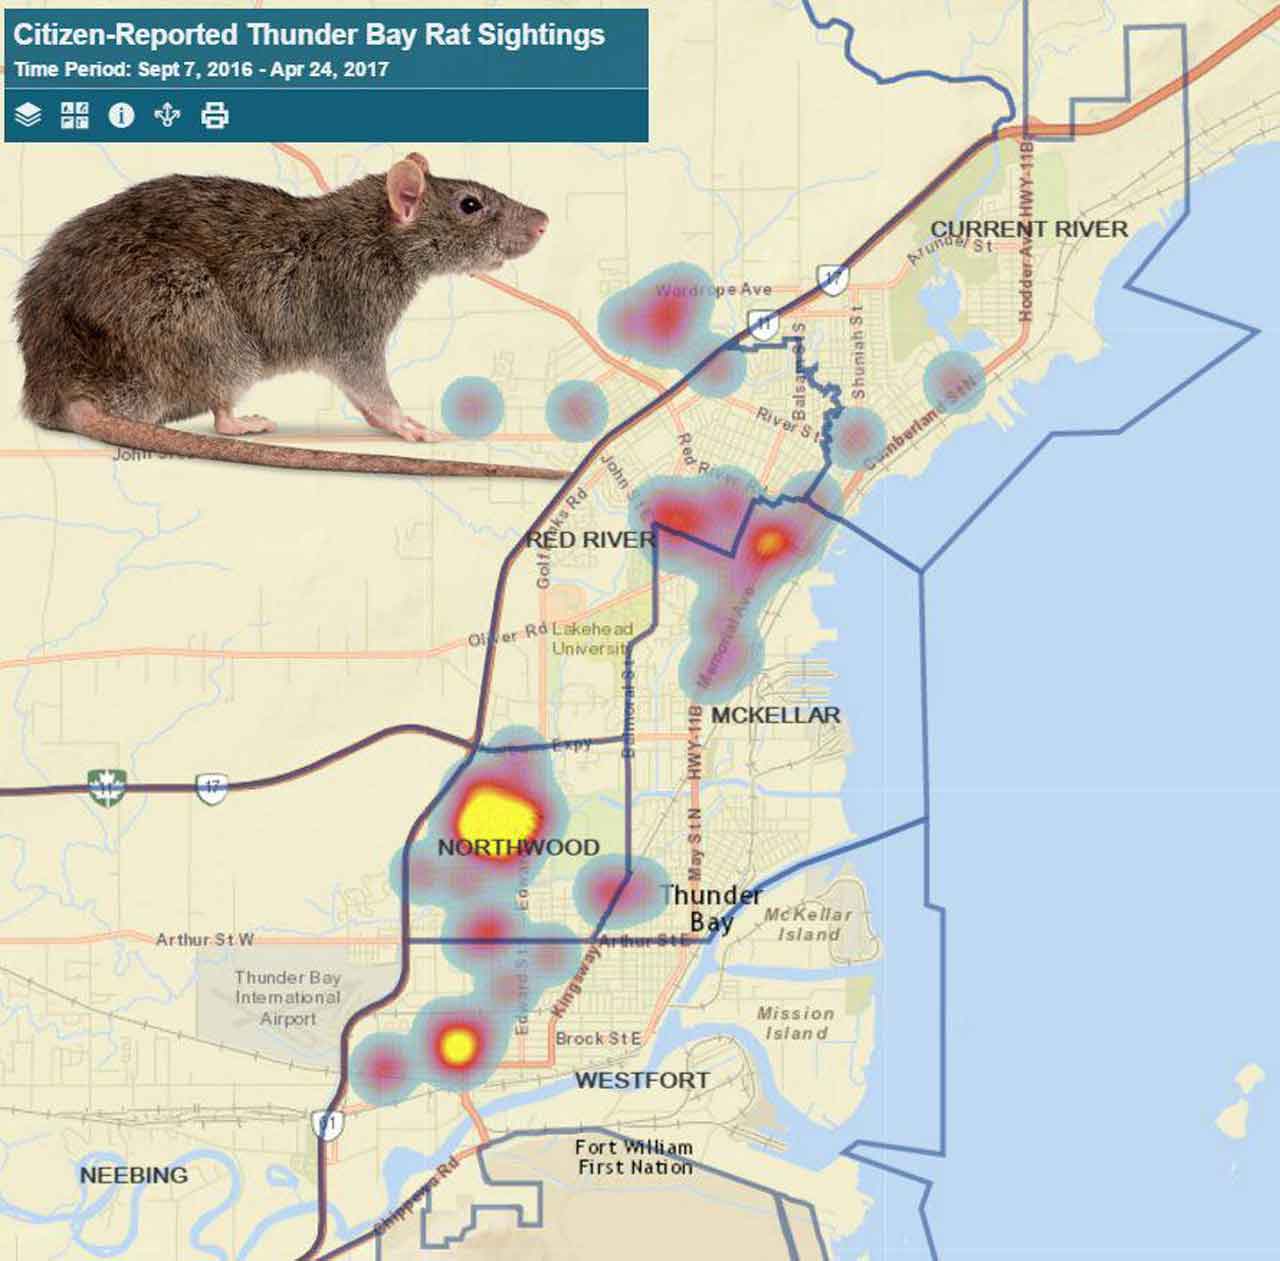 TBDHU Rat Map from Citizen reported rats infestations (2017)